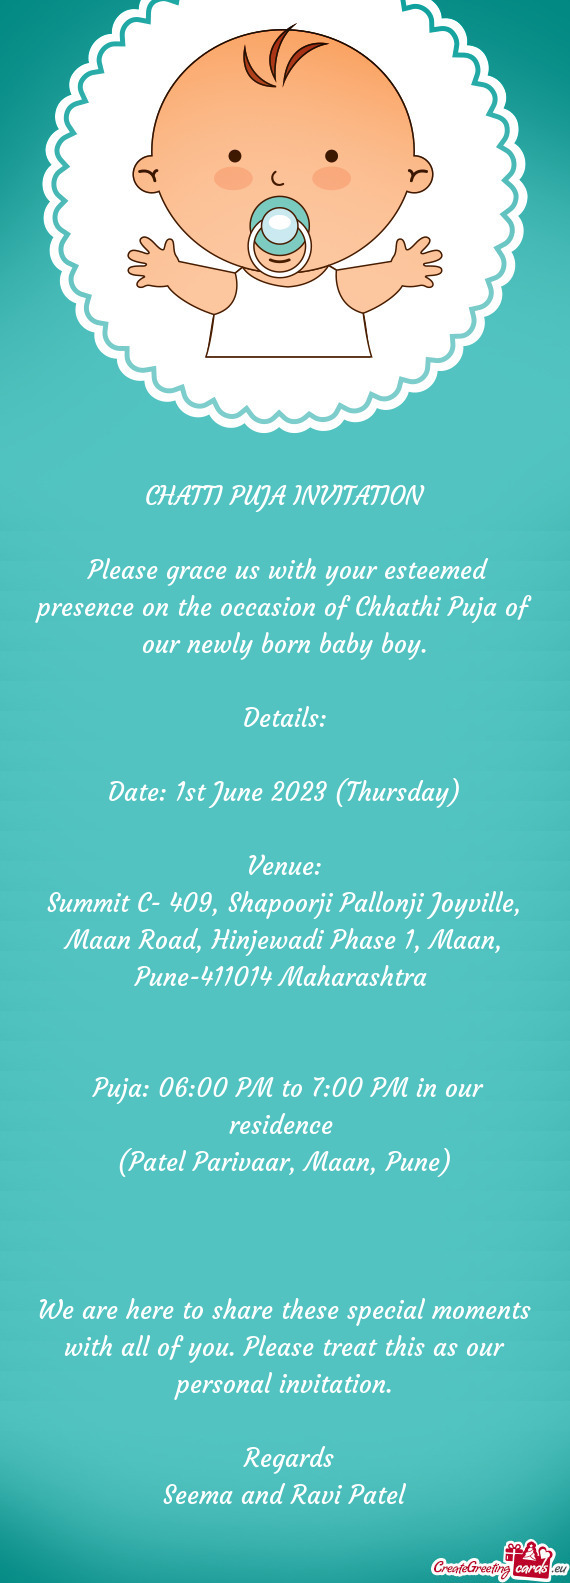 Please grace us with your esteemed presence on the occasion of Chhathi Puja of our newly born baby